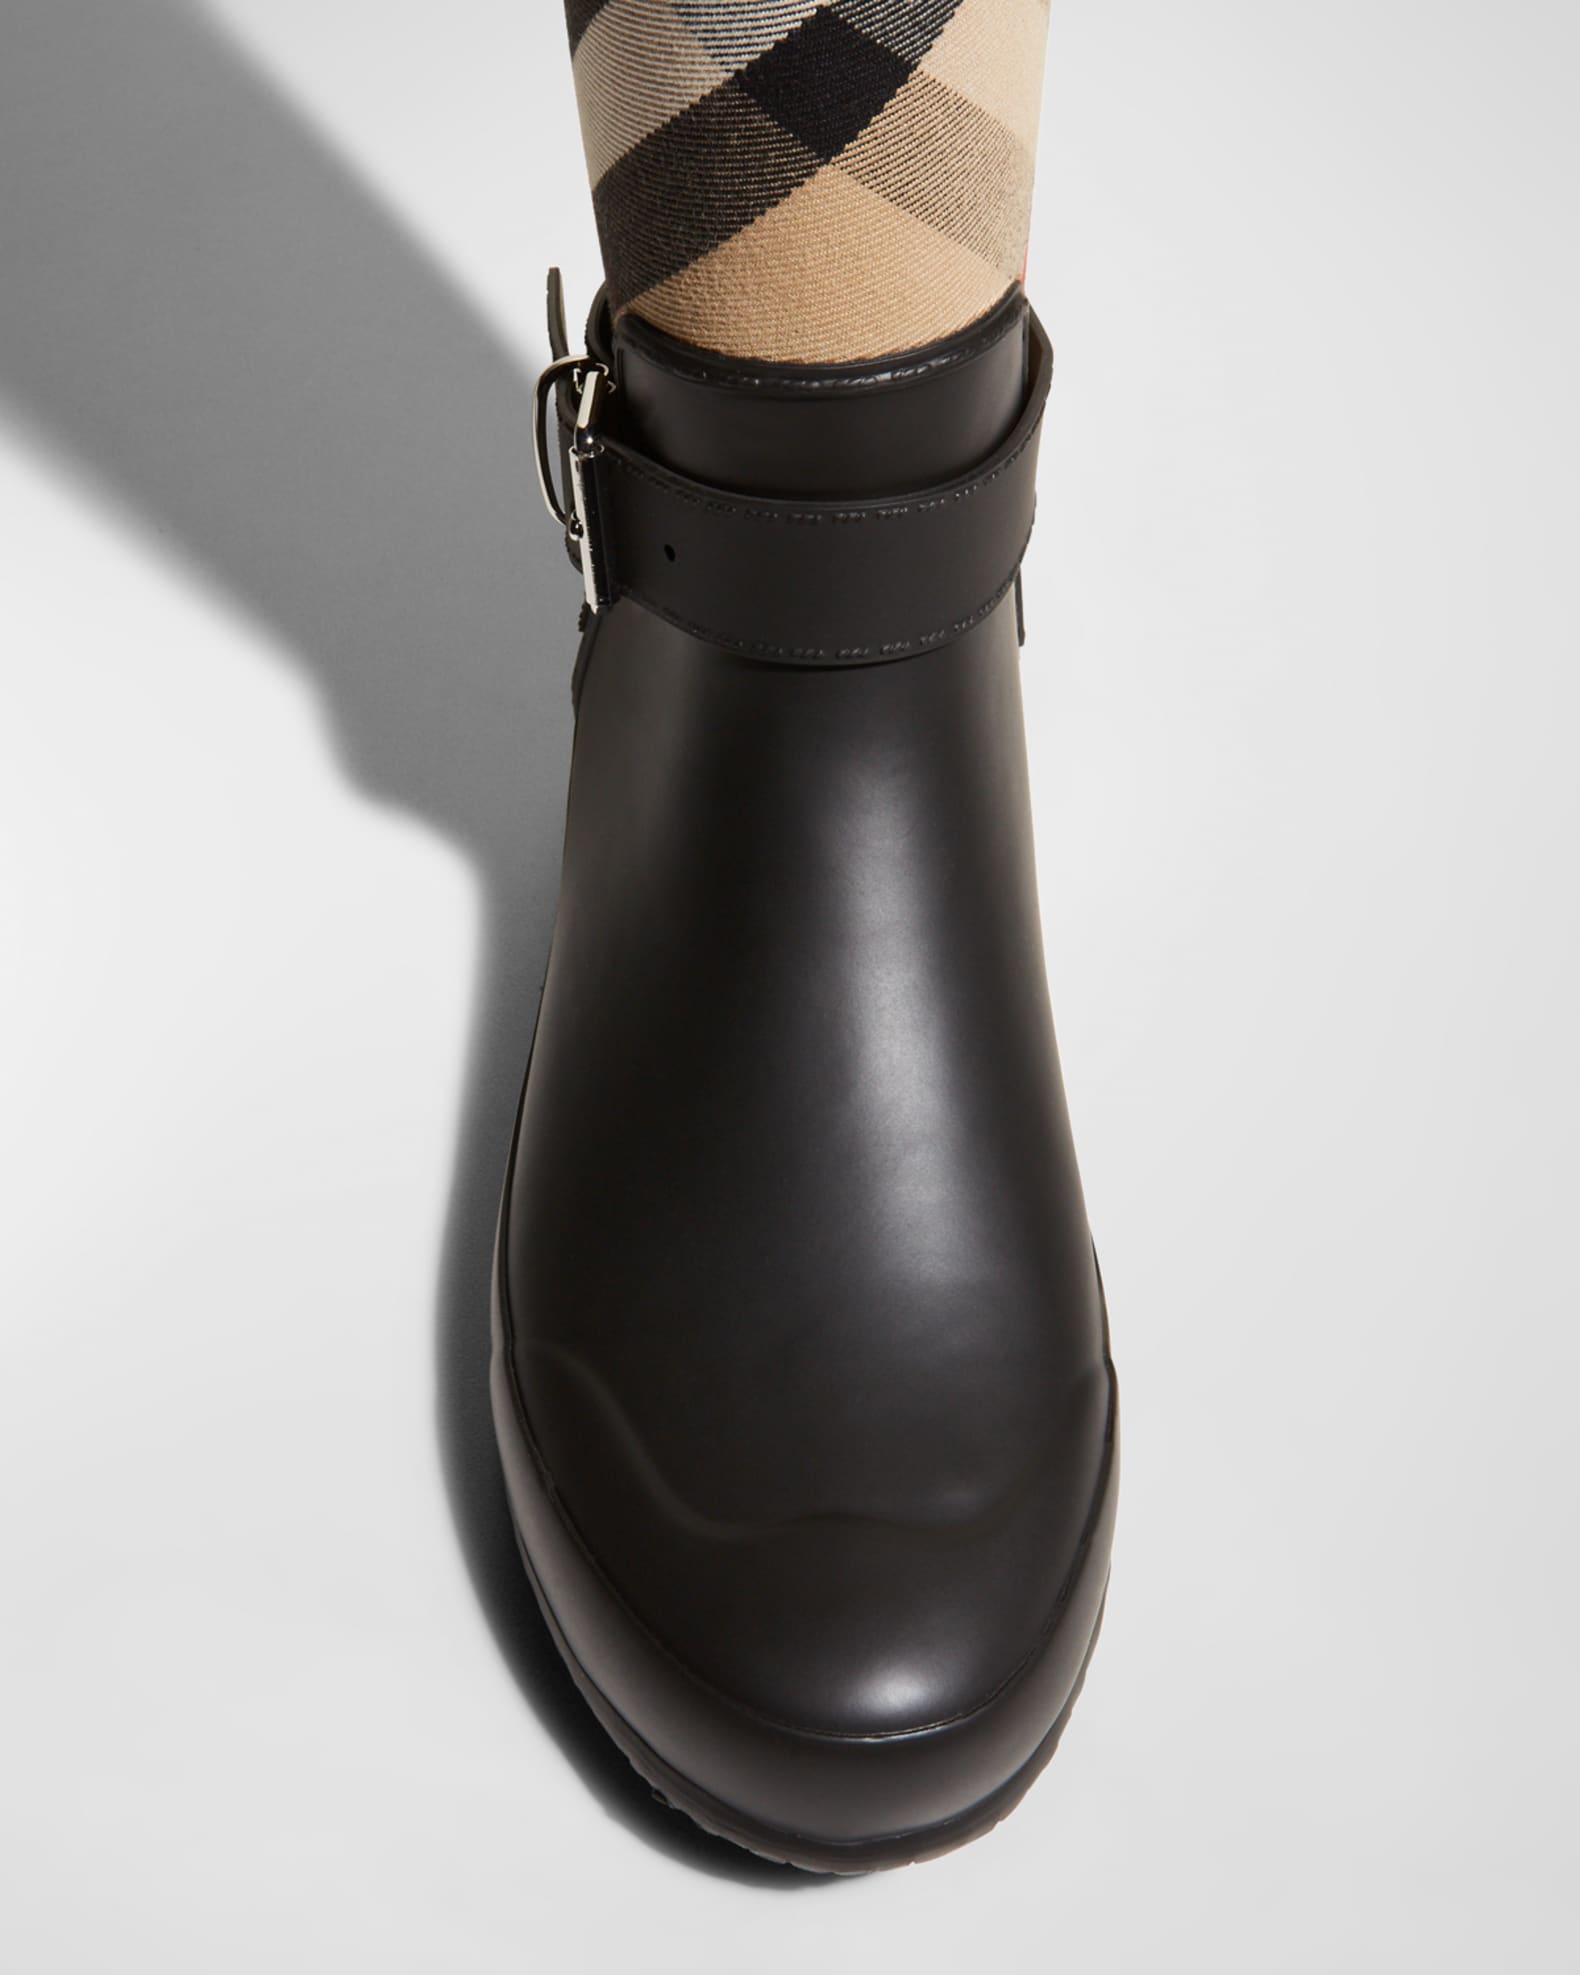 Burberry Simeon Rain Boots Review & Unboxing